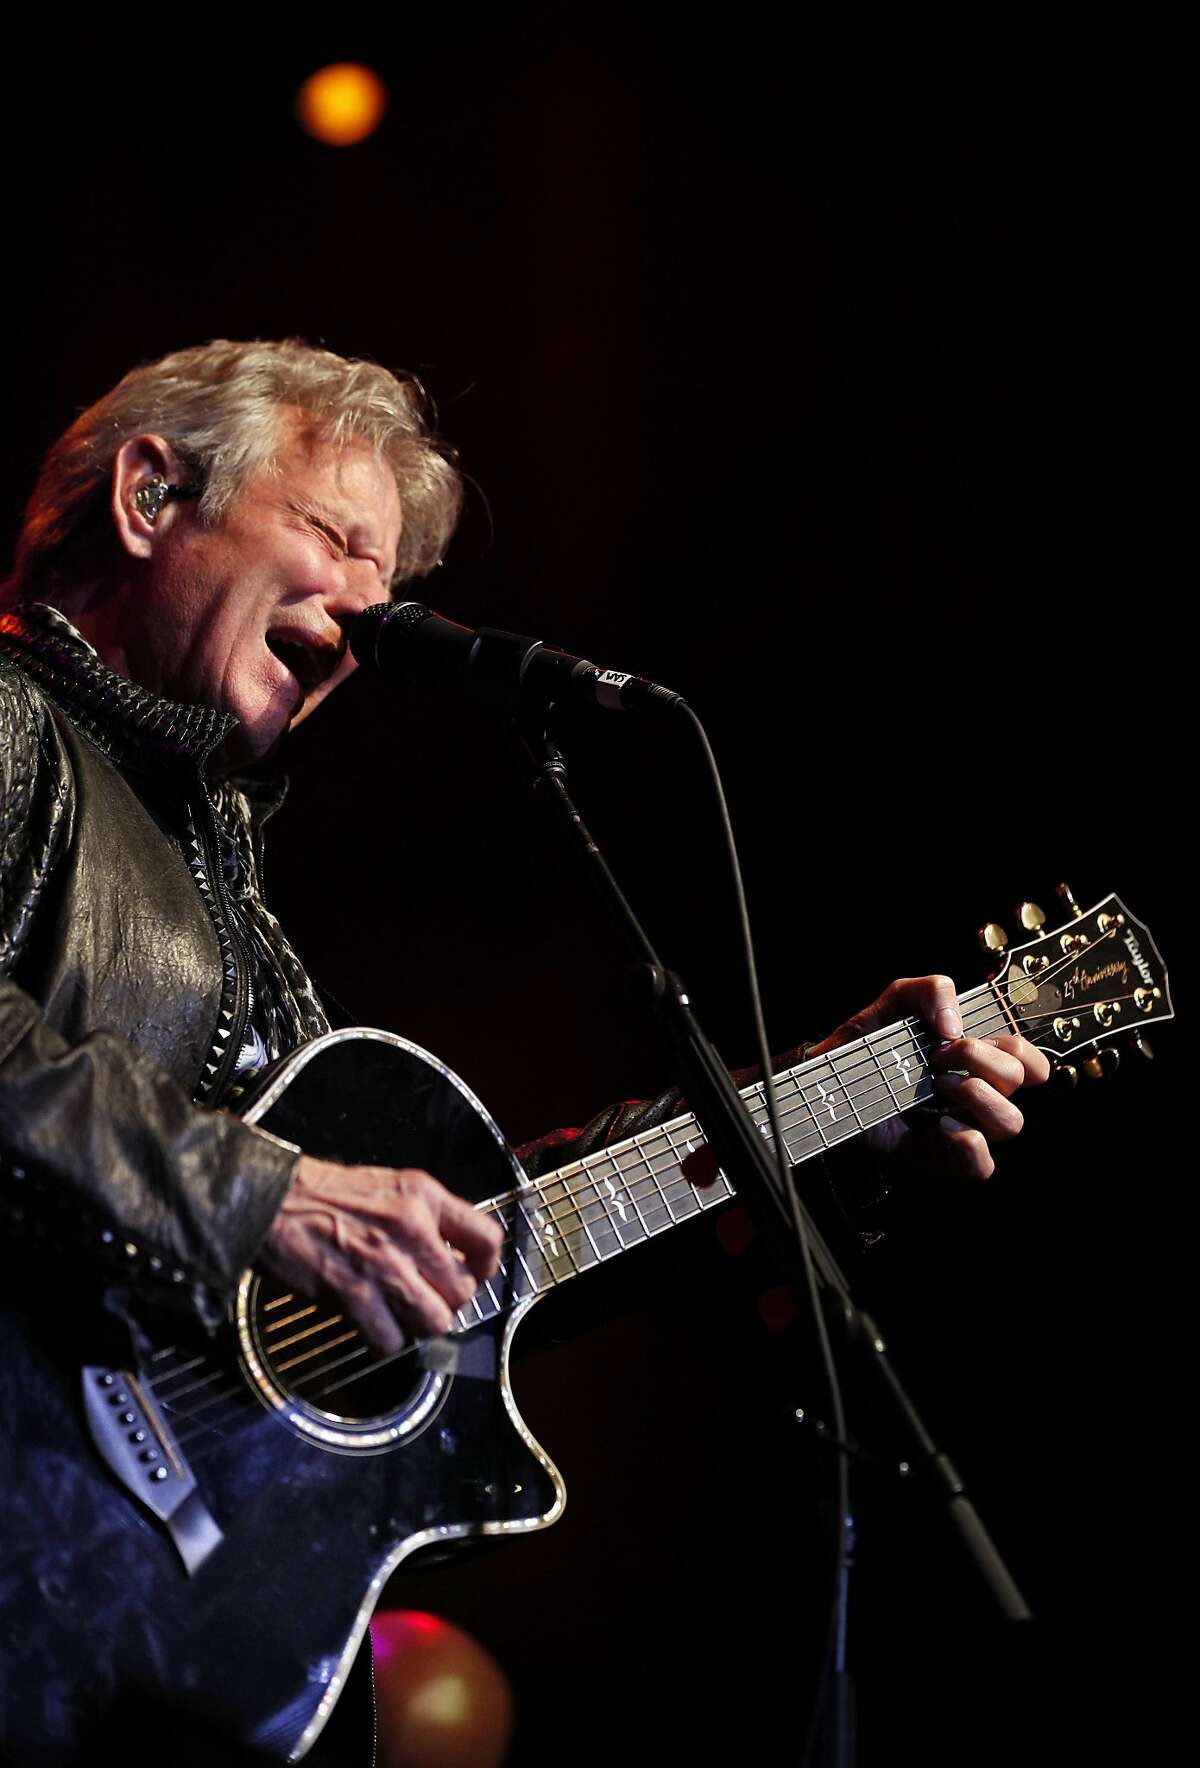 Don Felder performs during Acoustics 4 A Cure at the Fillmore in San Francisco, Calif., on Monday, May 15, 2017. The evening is a concert event created by Sammy Hagar and James Hetfield to help raise funds for the pediatric cancer research being performed at the UCSF Benioff Children's Hospital.